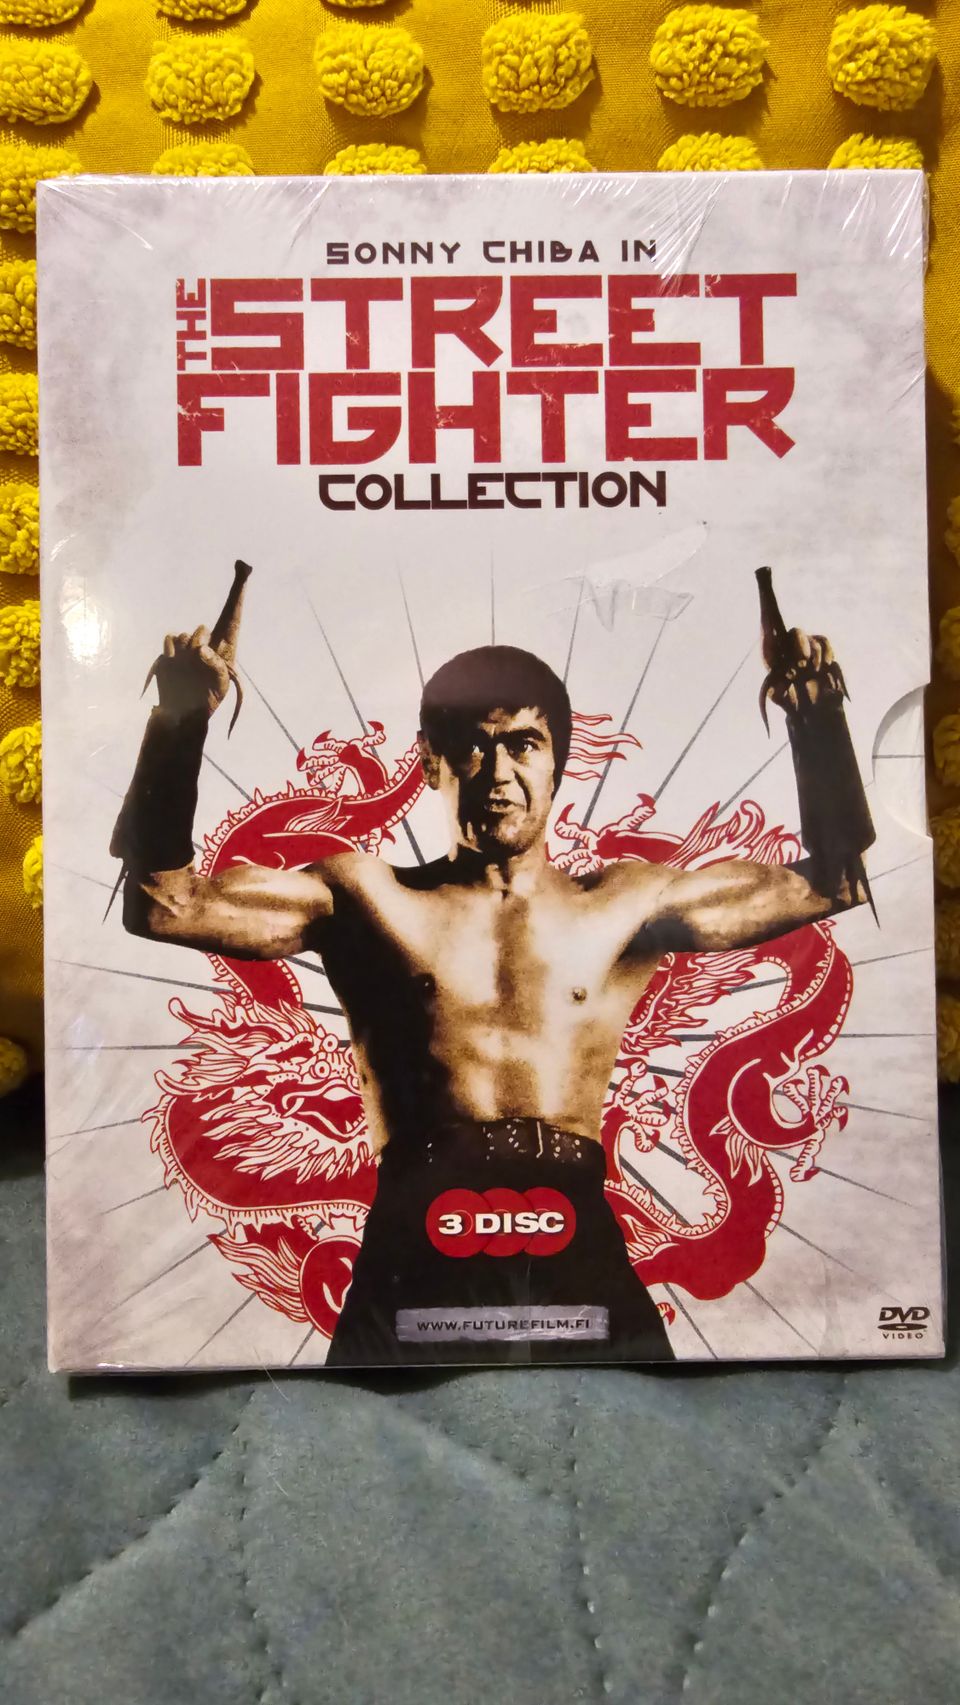 The street fighter collection dvd